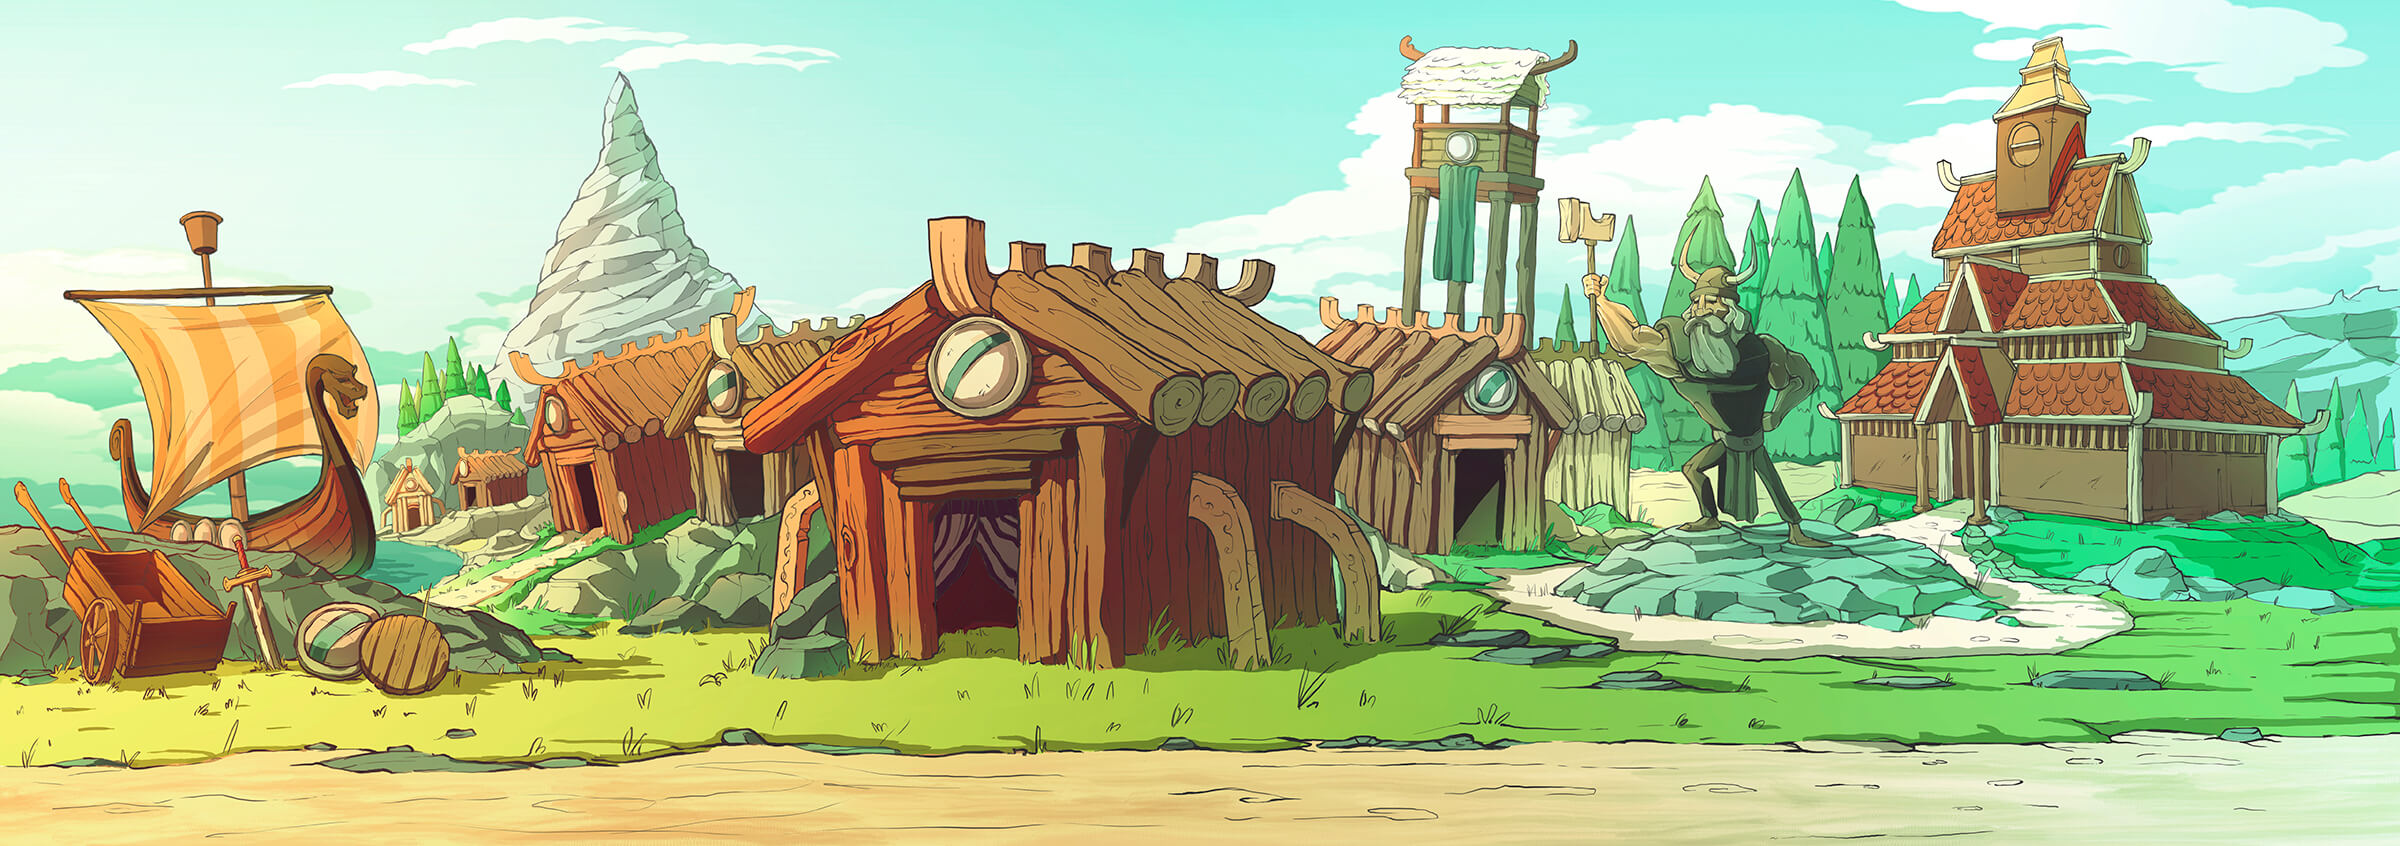 Cartoon-style depiction of an ancient viking village with wooden huts, a longboat, and a statue of a hammer-wielding warrior.